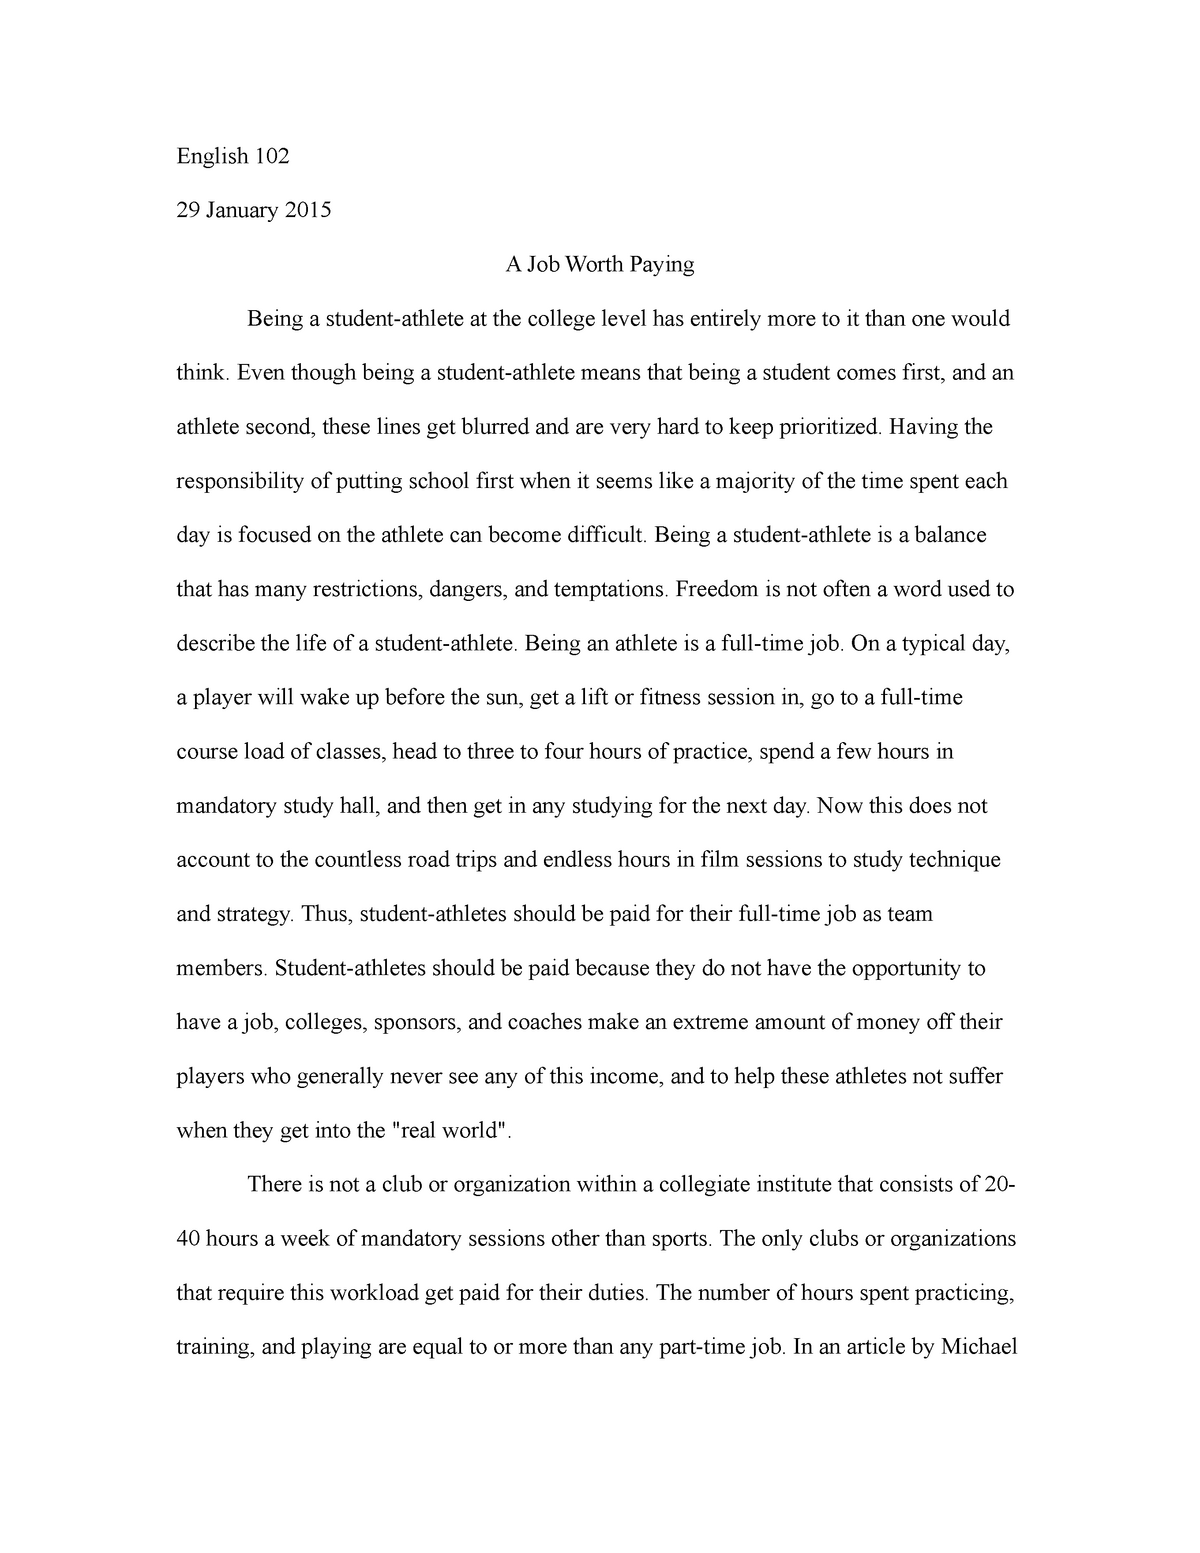 Essay about family events